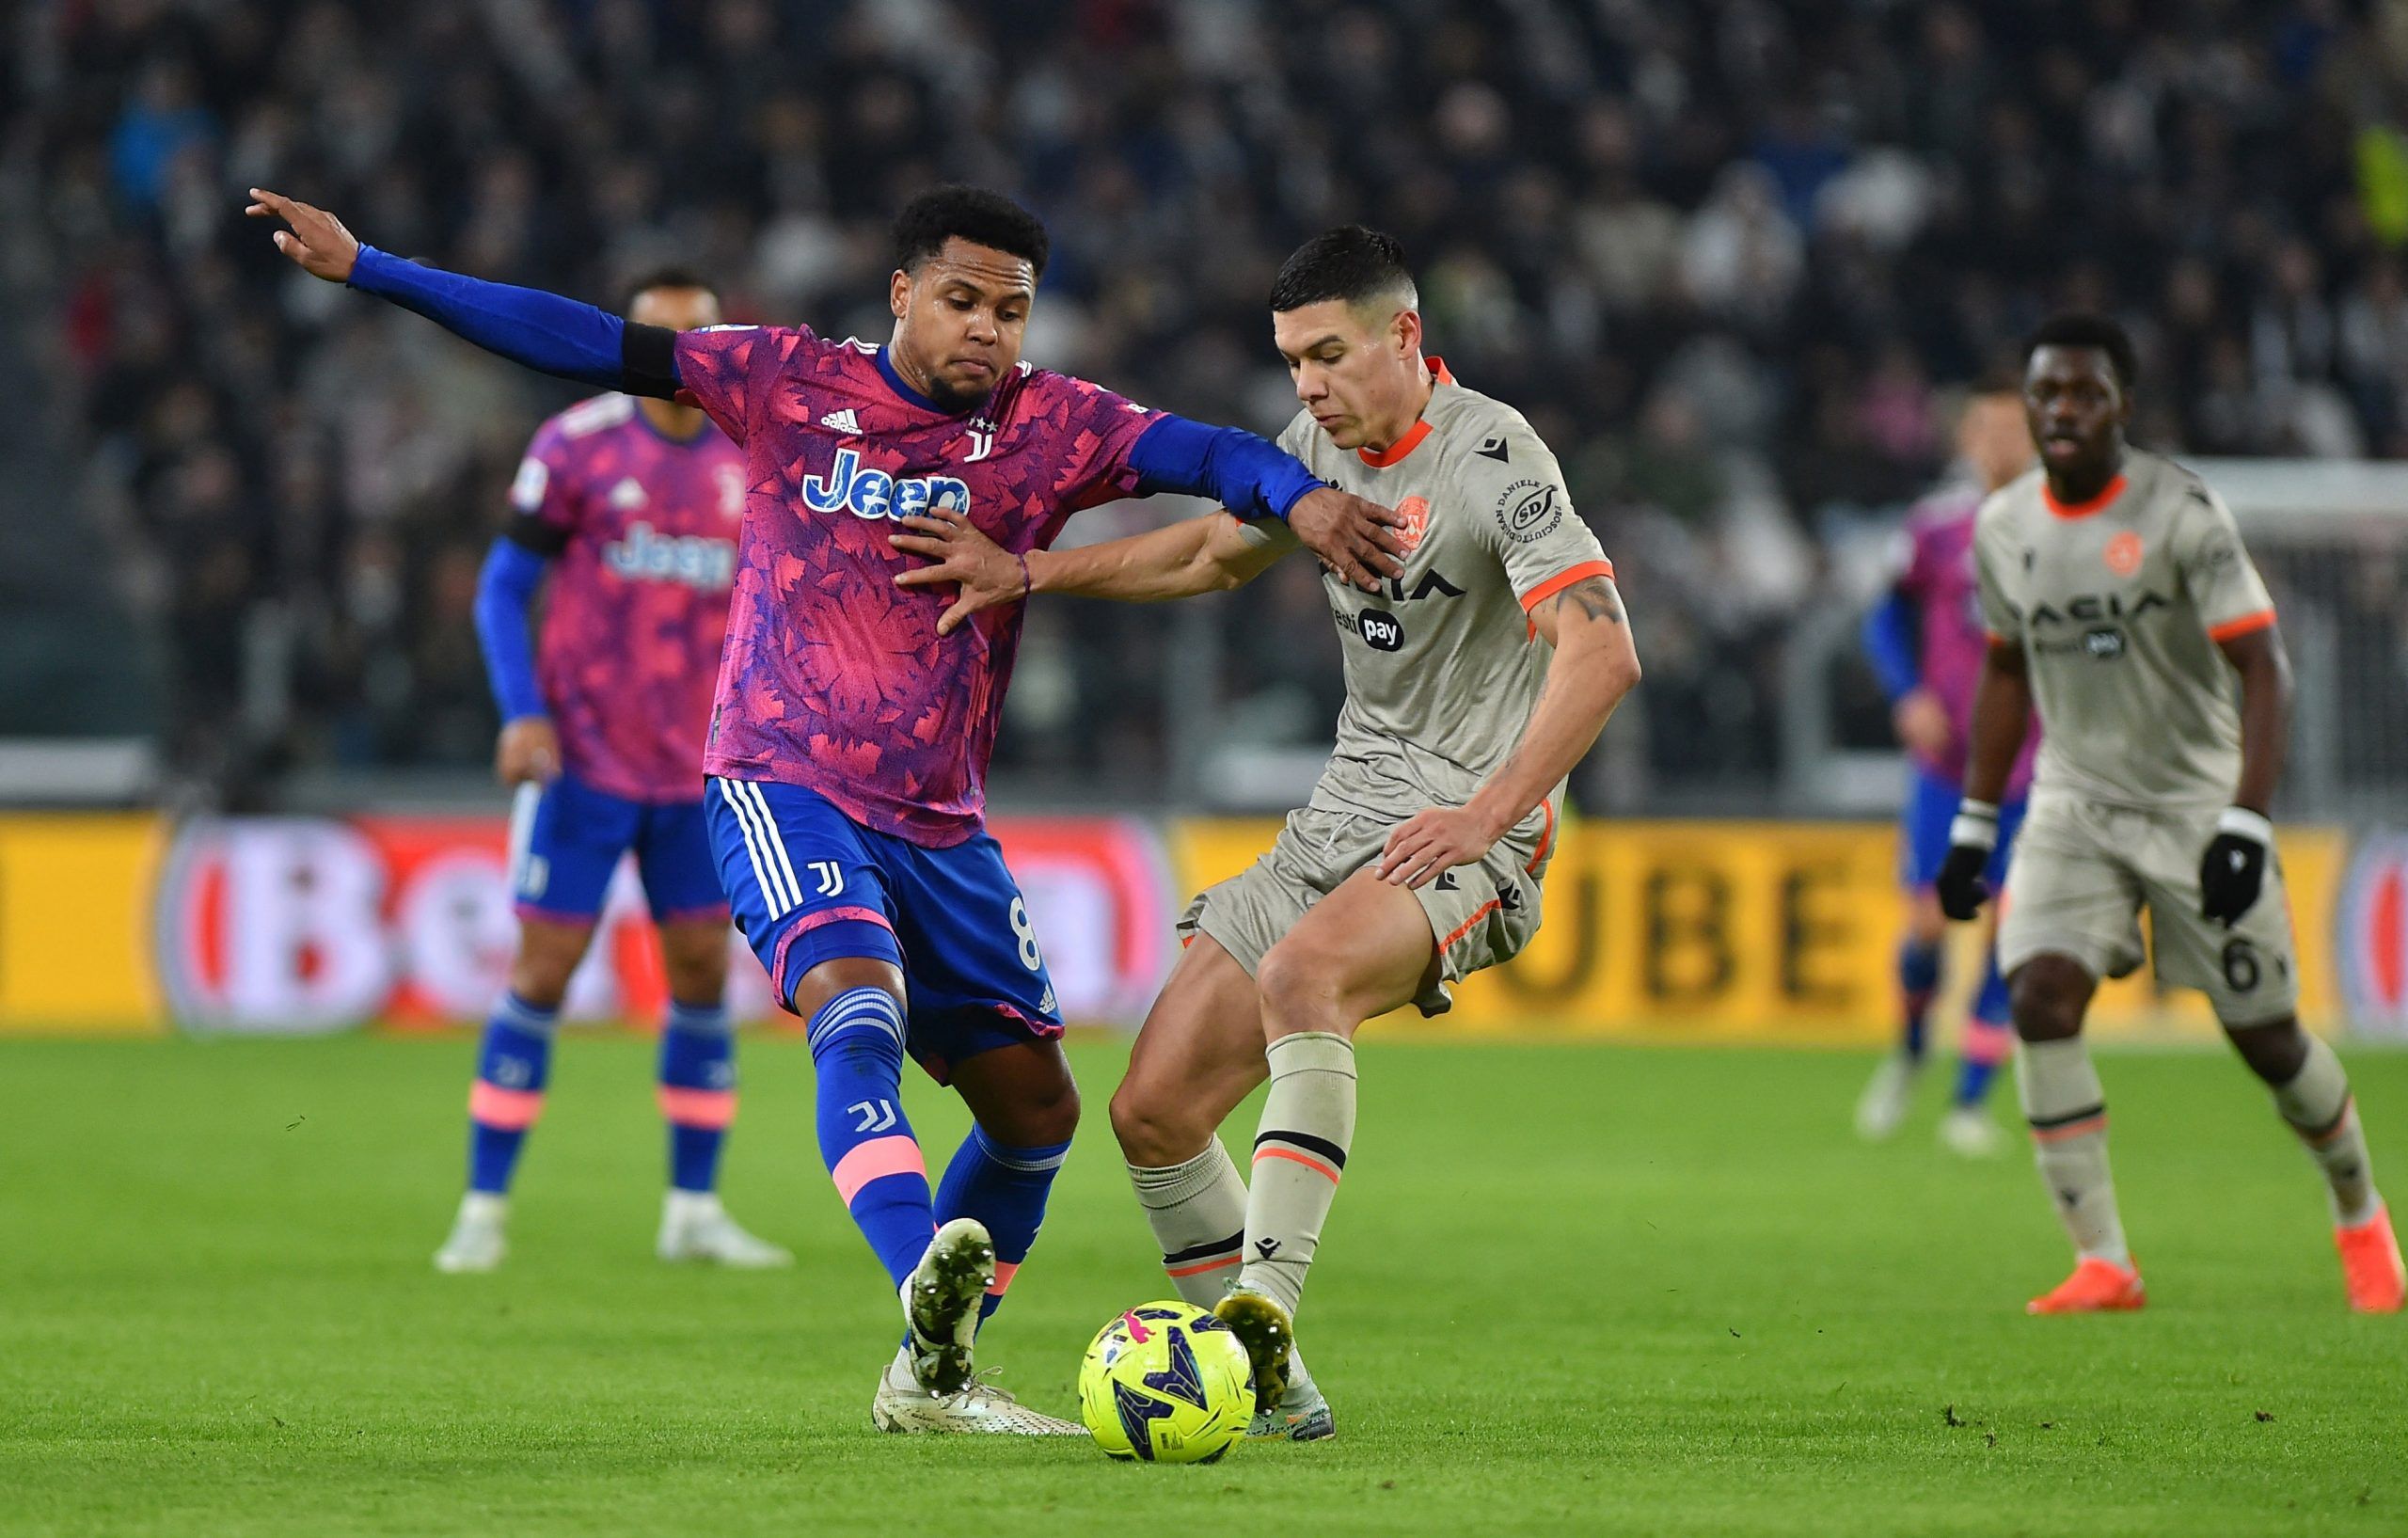 Soccer Football - Serie A - Juventus v Udinese - Allianz Stadium, Turin, Italy - January 7, 2023 Juventus' Weston McKennie in action with Udinese's Mato Jajalo REUTERS/Massimo Pinca